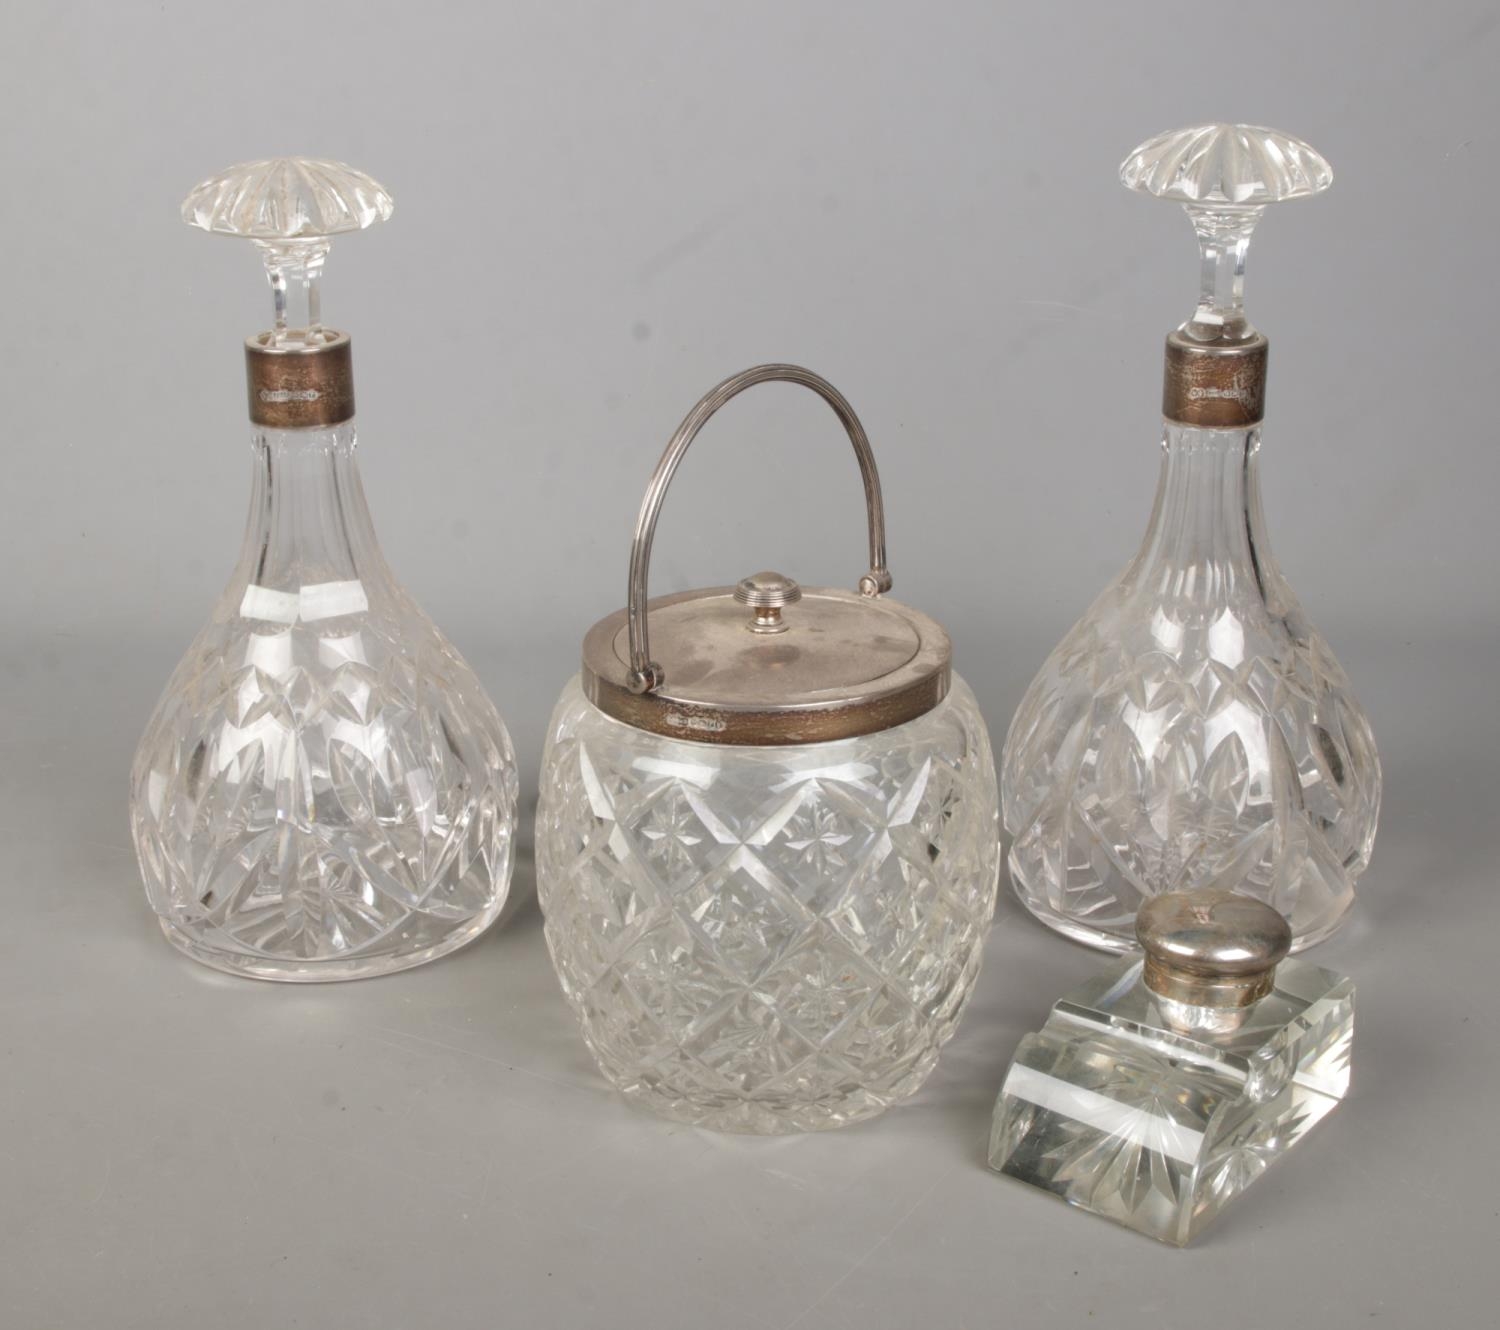 Four pieces of silver mounted glassware, to include three piece Joseph Rodgers & Sons decanter and